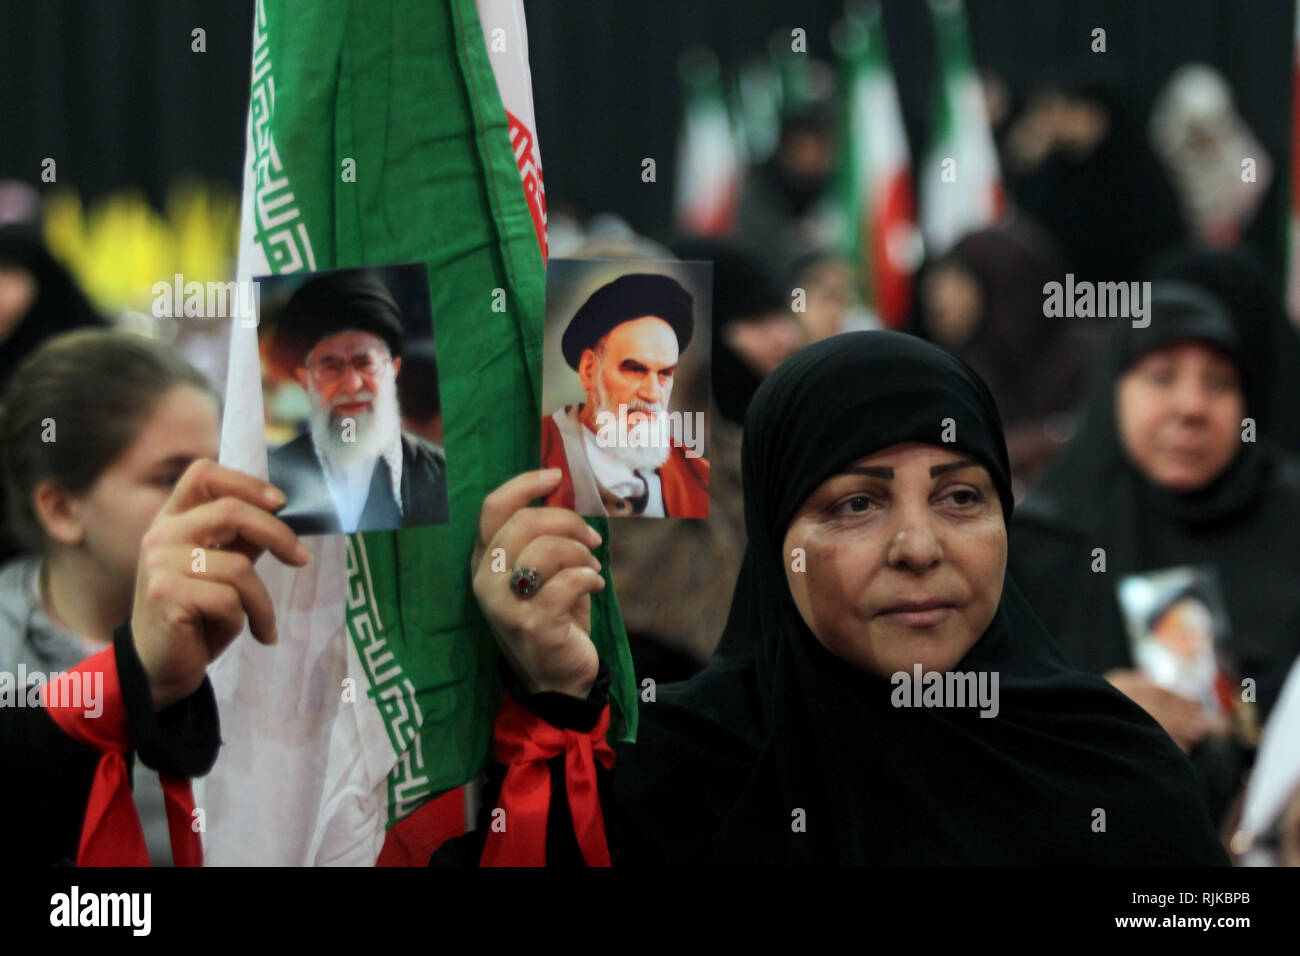 06 February 2019, Lebanon, Beirut: Supporters of Hezbollah, the pro-Iranian Lebanese Islamist political party and militant group, hold pictures of Ayatollah Khomeini, former Supreme Leader of Iran and leader of the 1979 Iranian Revolution, and Iran's current Supreme leader Ayatollah Ali Khamenei, during a rally to mark the 40th anniversary of the Iranian Islamic Revolution which toppled Mohammad Reza Pahlavi, the last Shah of Iran. Photo: Marwan Naamani/dpa Stock Photo